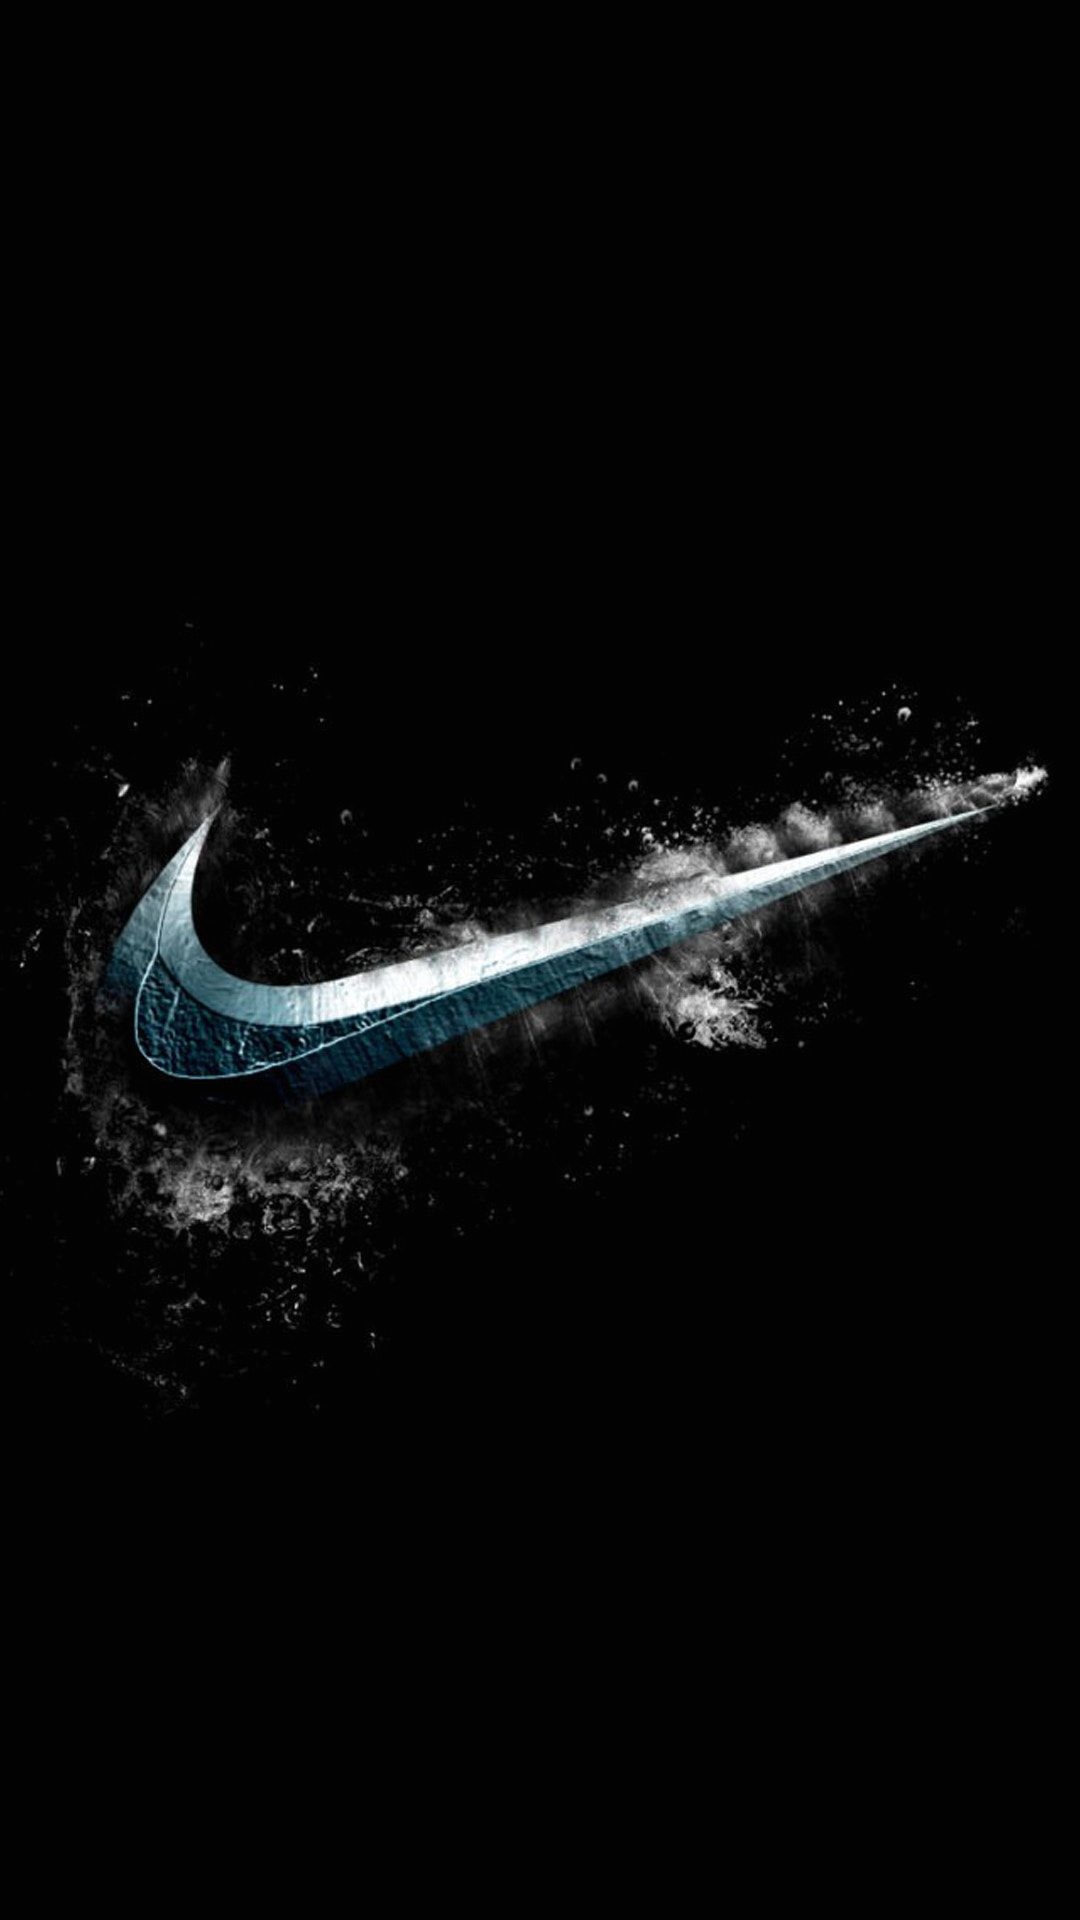 1080x1920 Free Nike Wallpaper for Iphone Download.